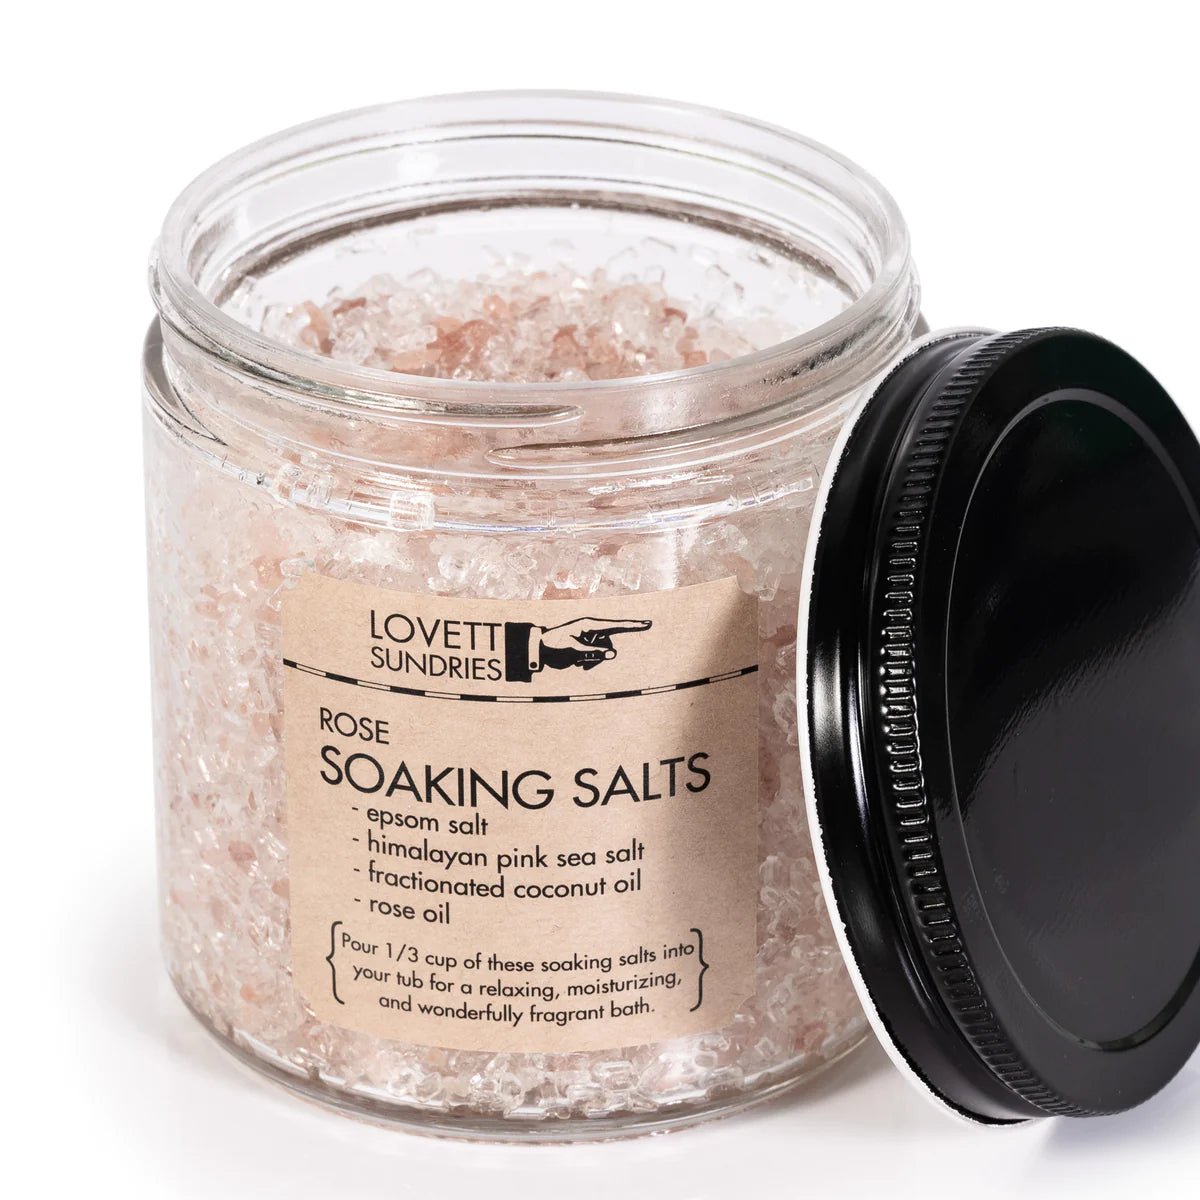 An open glass jar of rose soaking salts by lovett sundries. The salts are pink from the himalayan pink sea salt